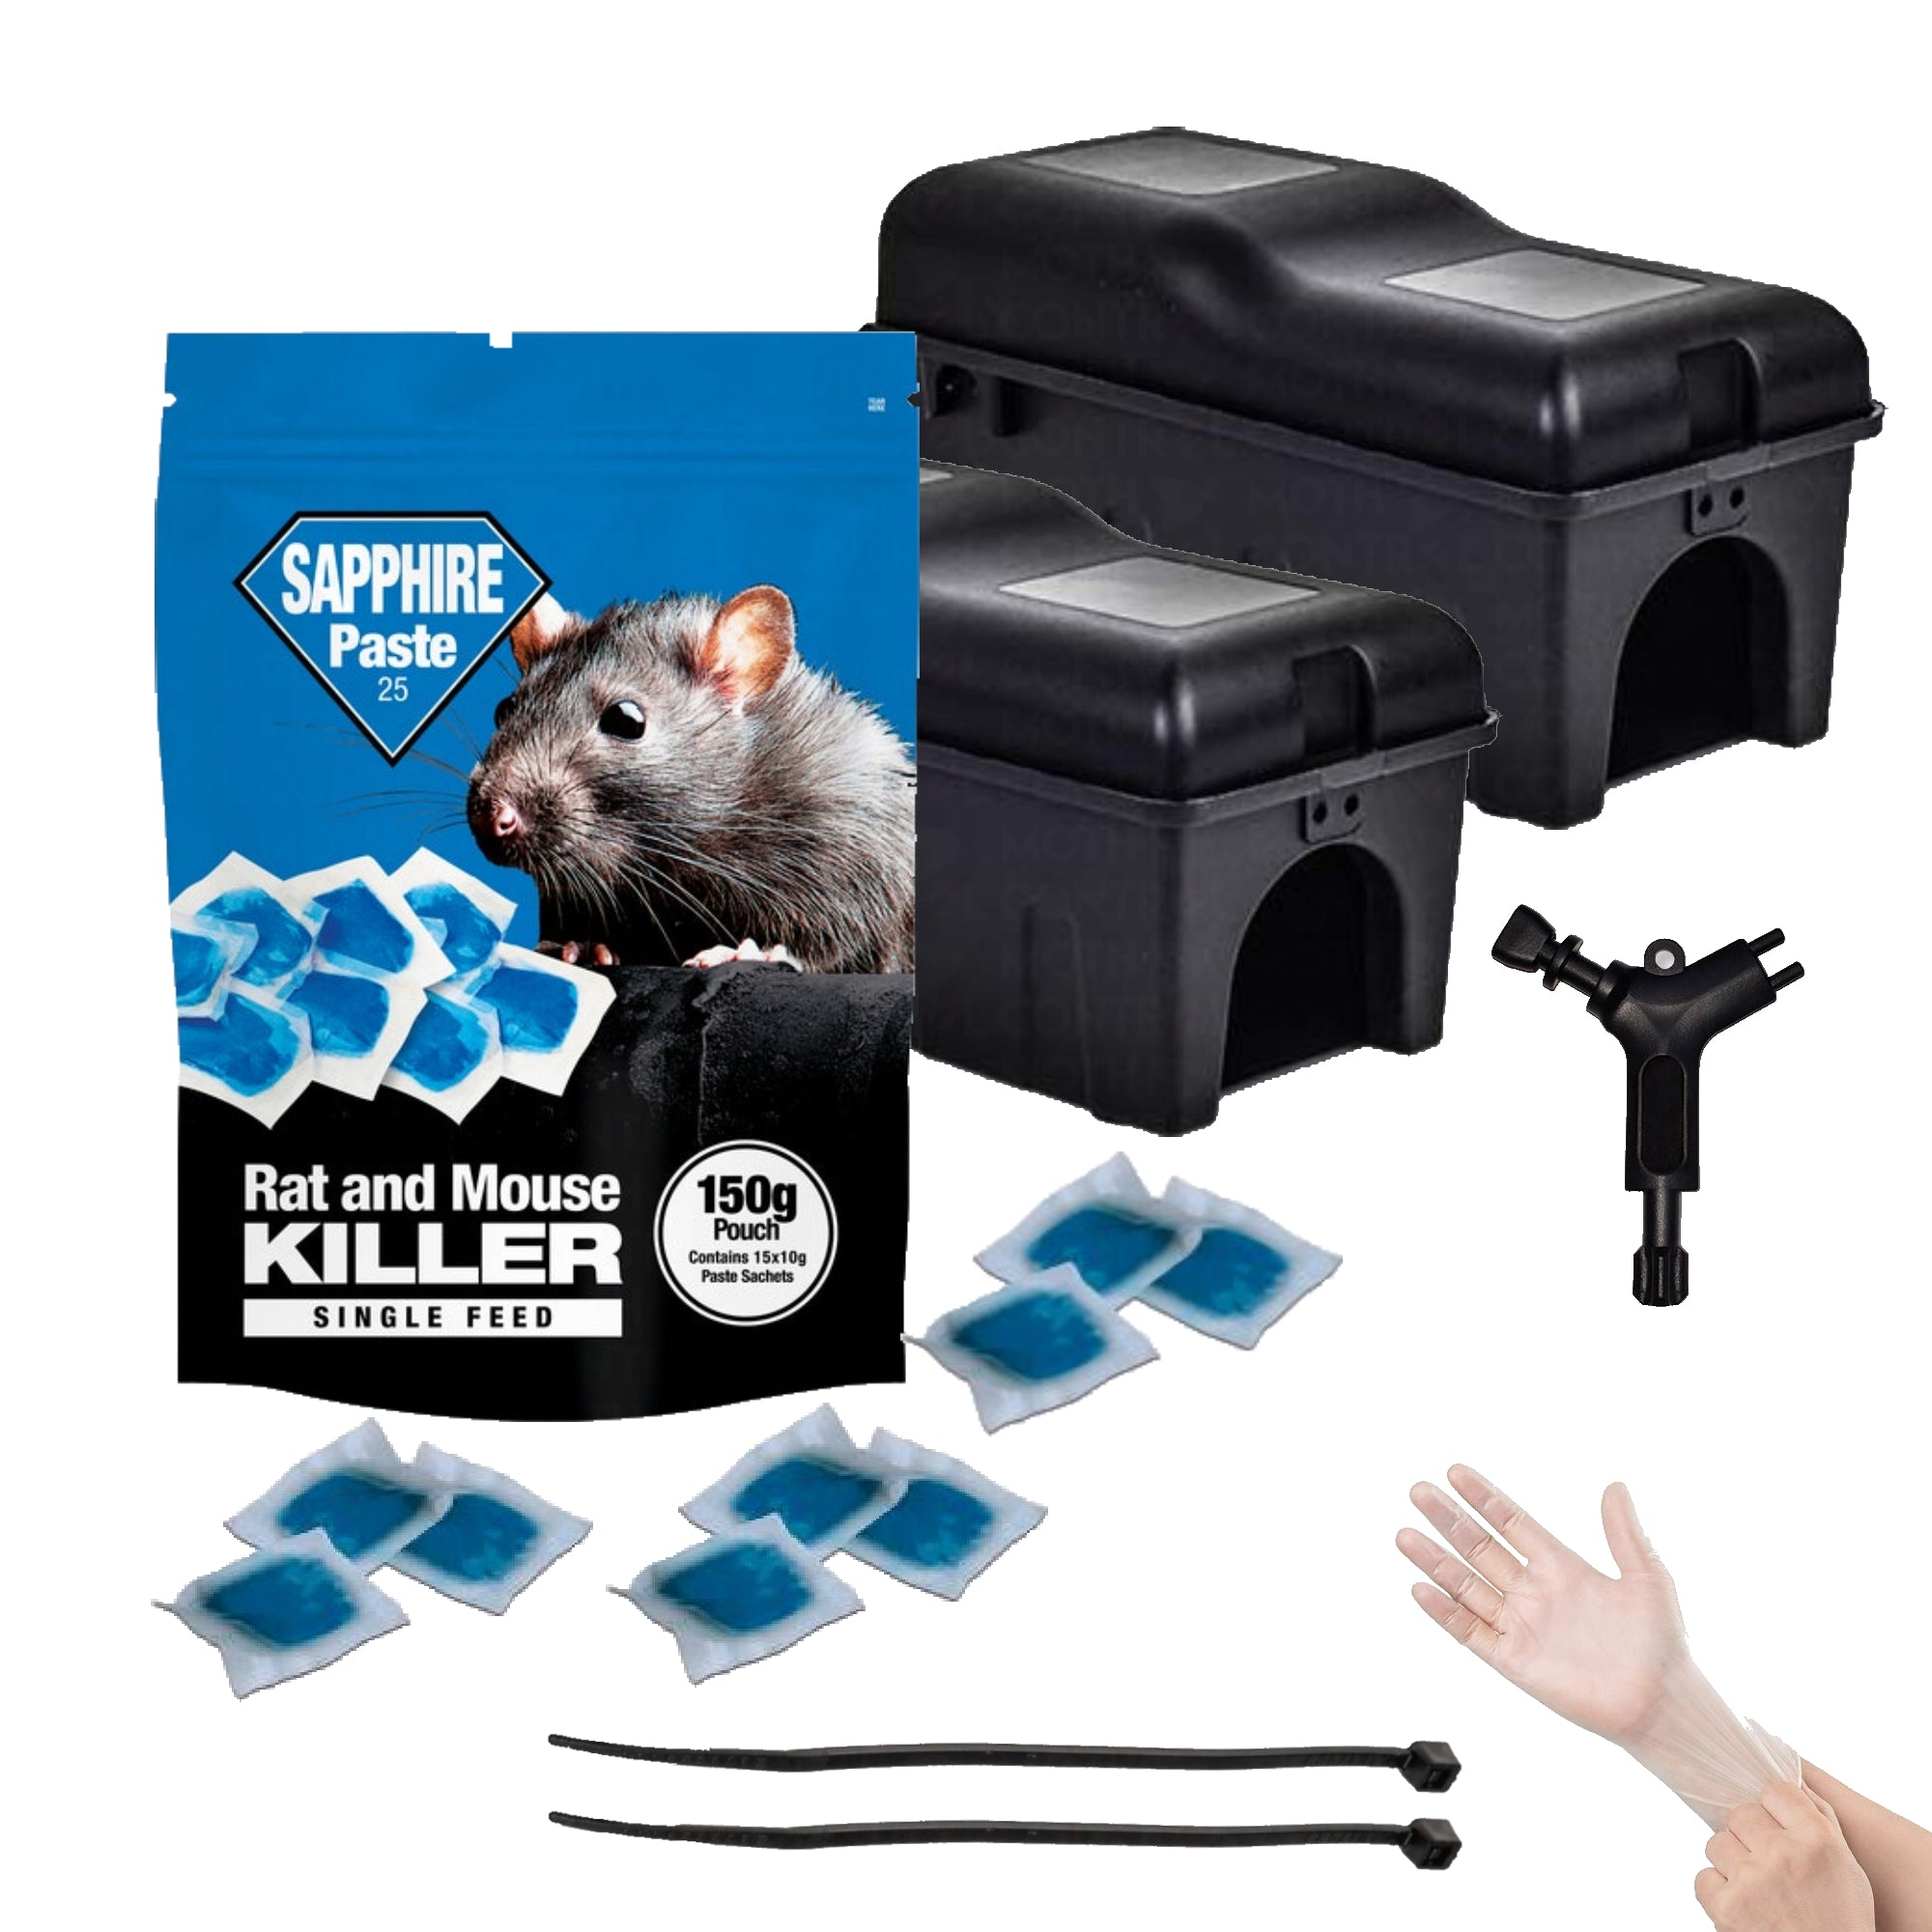 Bait Cage - Secures Bait to the Trap. Kill Rats the First Time!